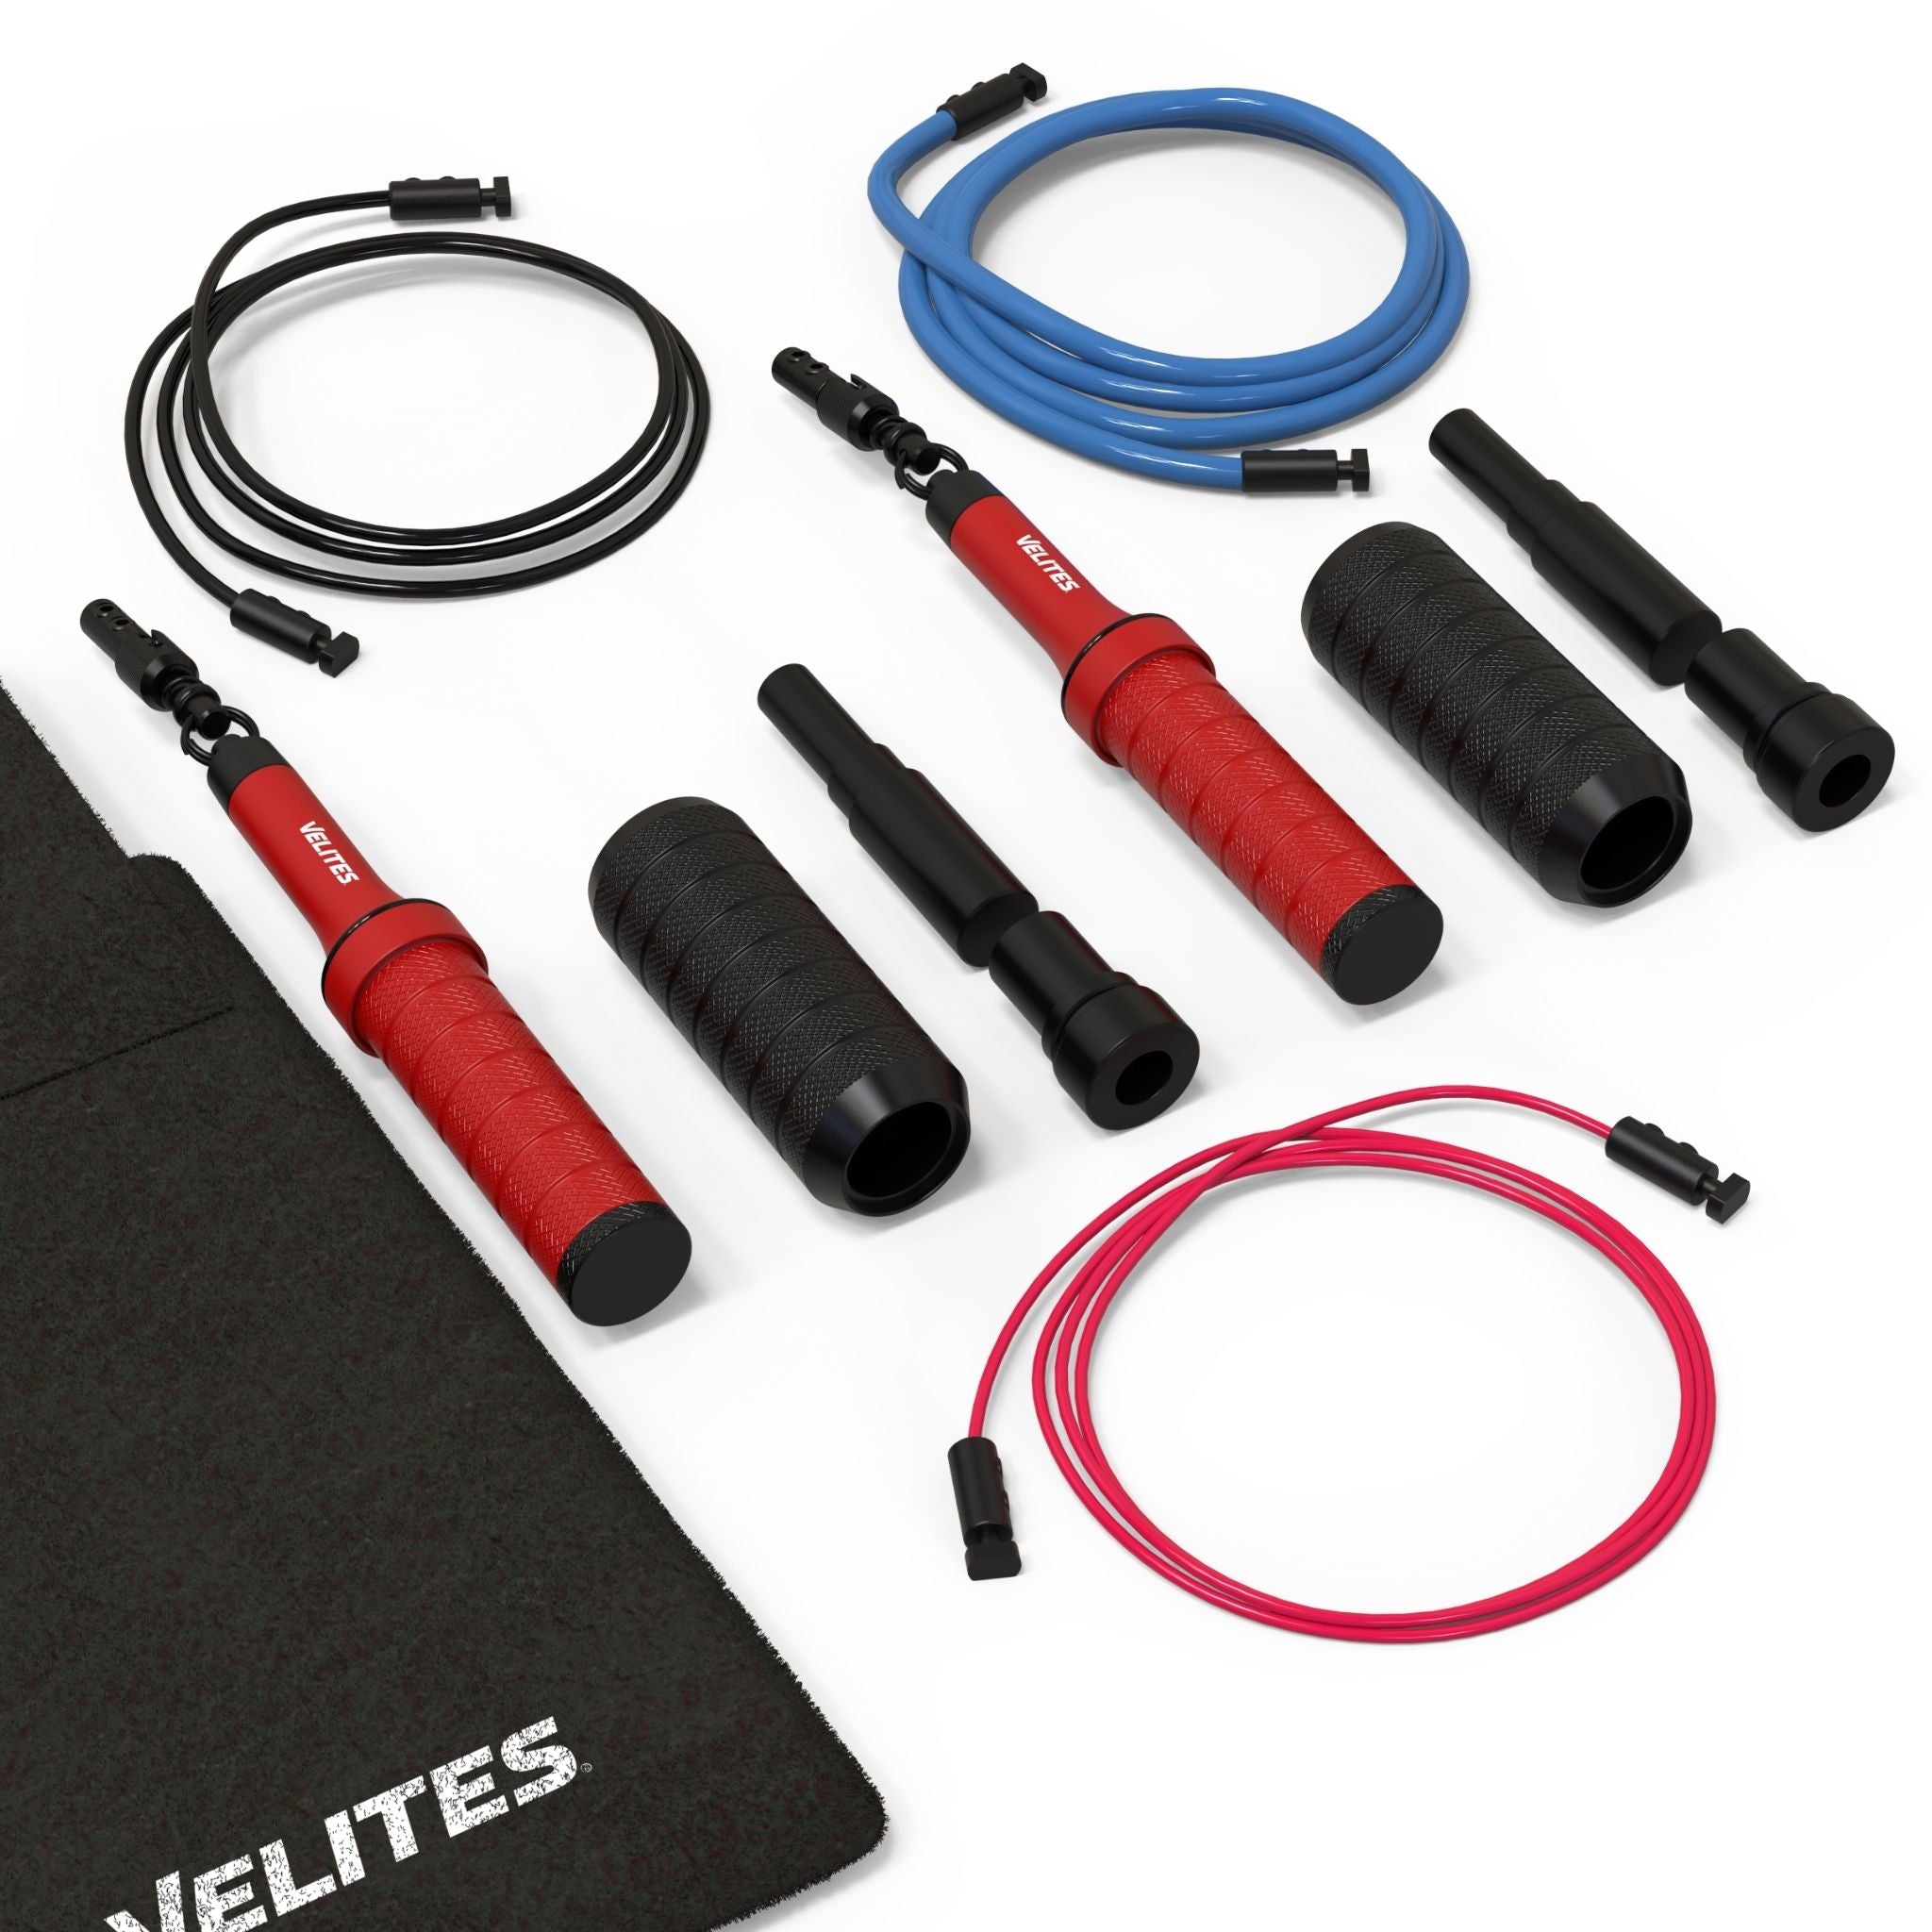 Pack Comba Earth 2.0 Velites + Lastres + Cables + Mat - rojo - 